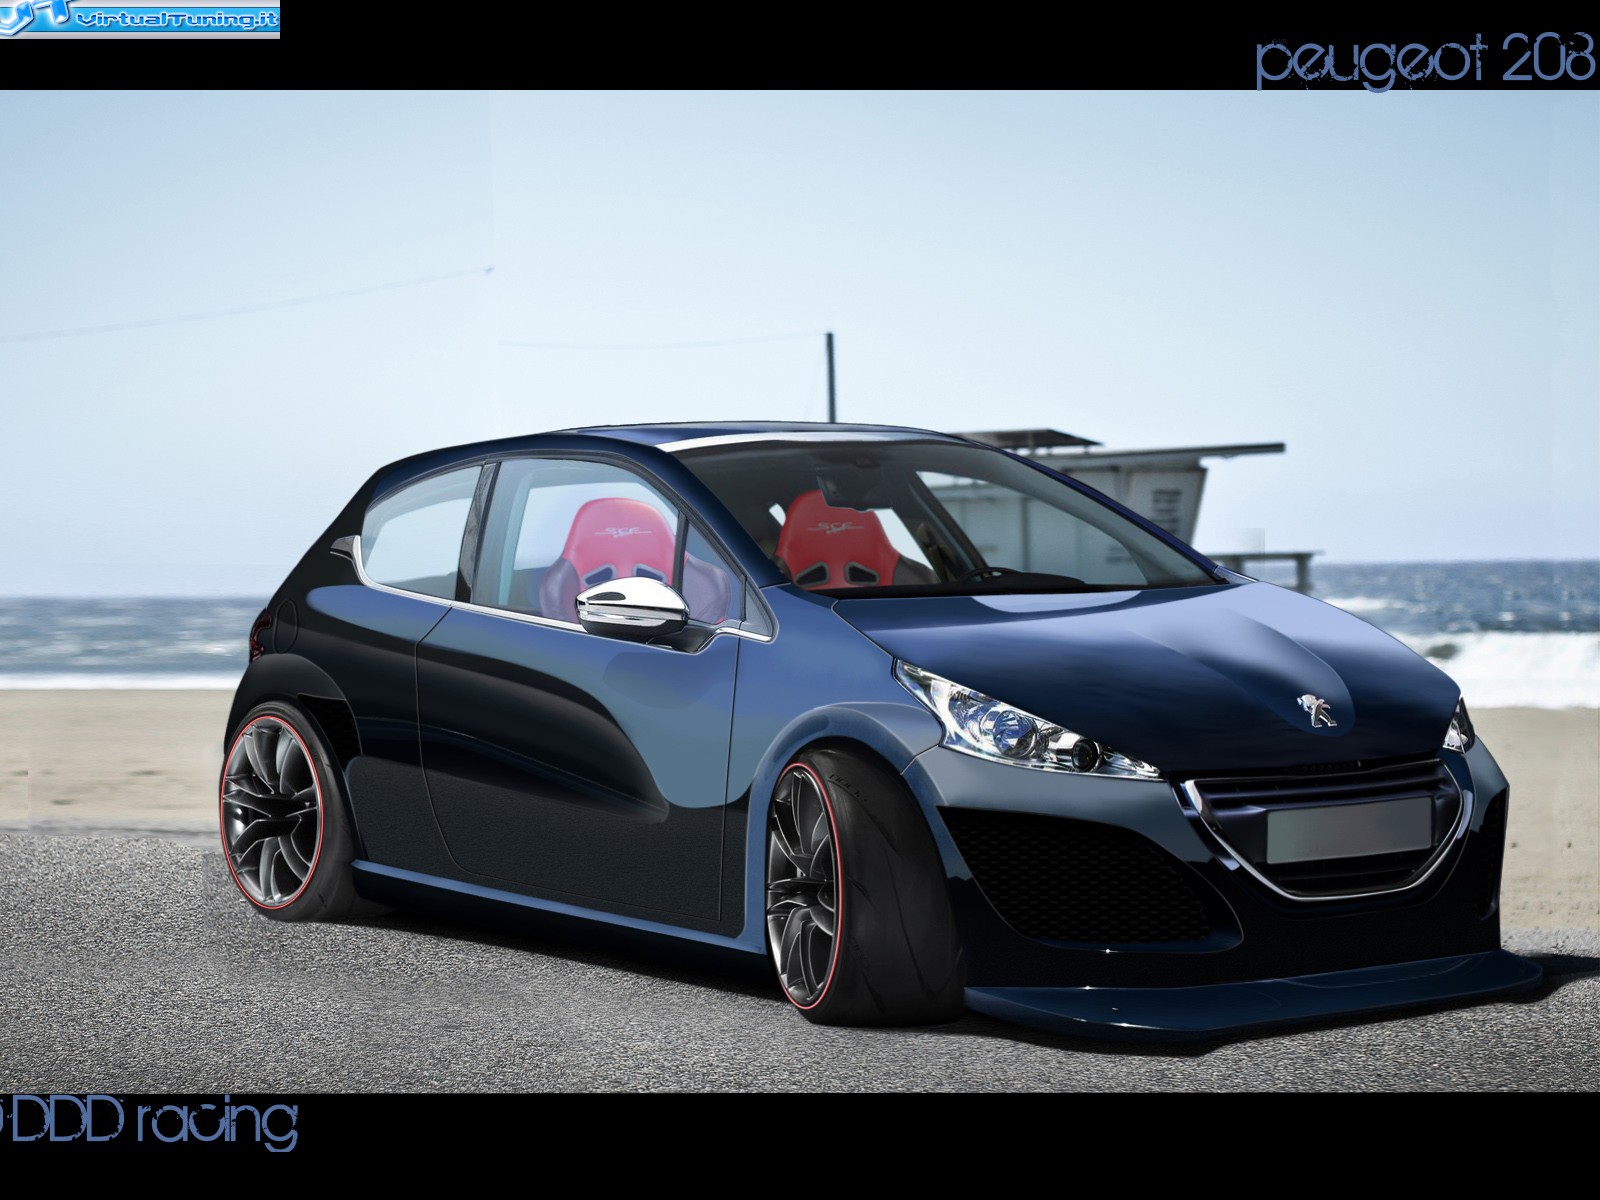 VirtualTuning PEUGEOT 208 by ddd racing